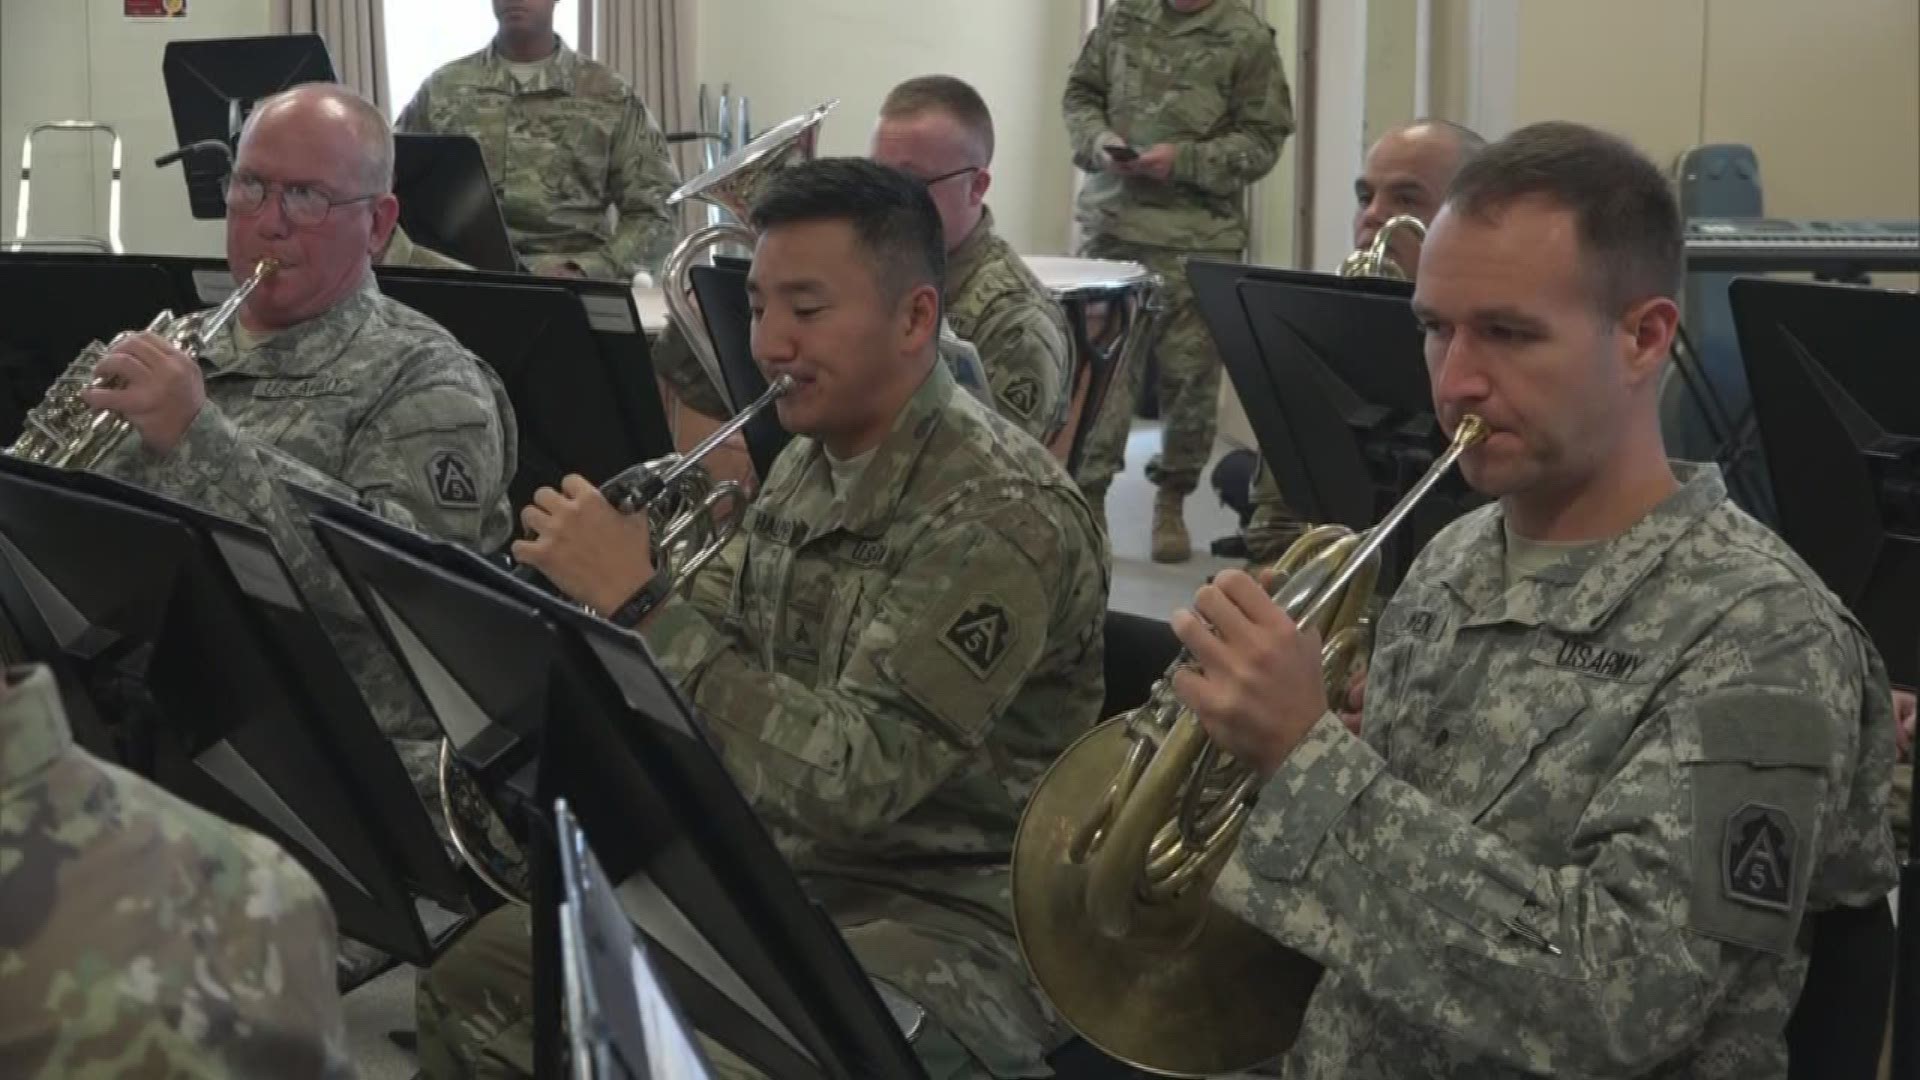 "Fort Sam's Own" has been serving the San Antonio community for more than 20 years, but the band will soon break up per orders from the U.S. Army.